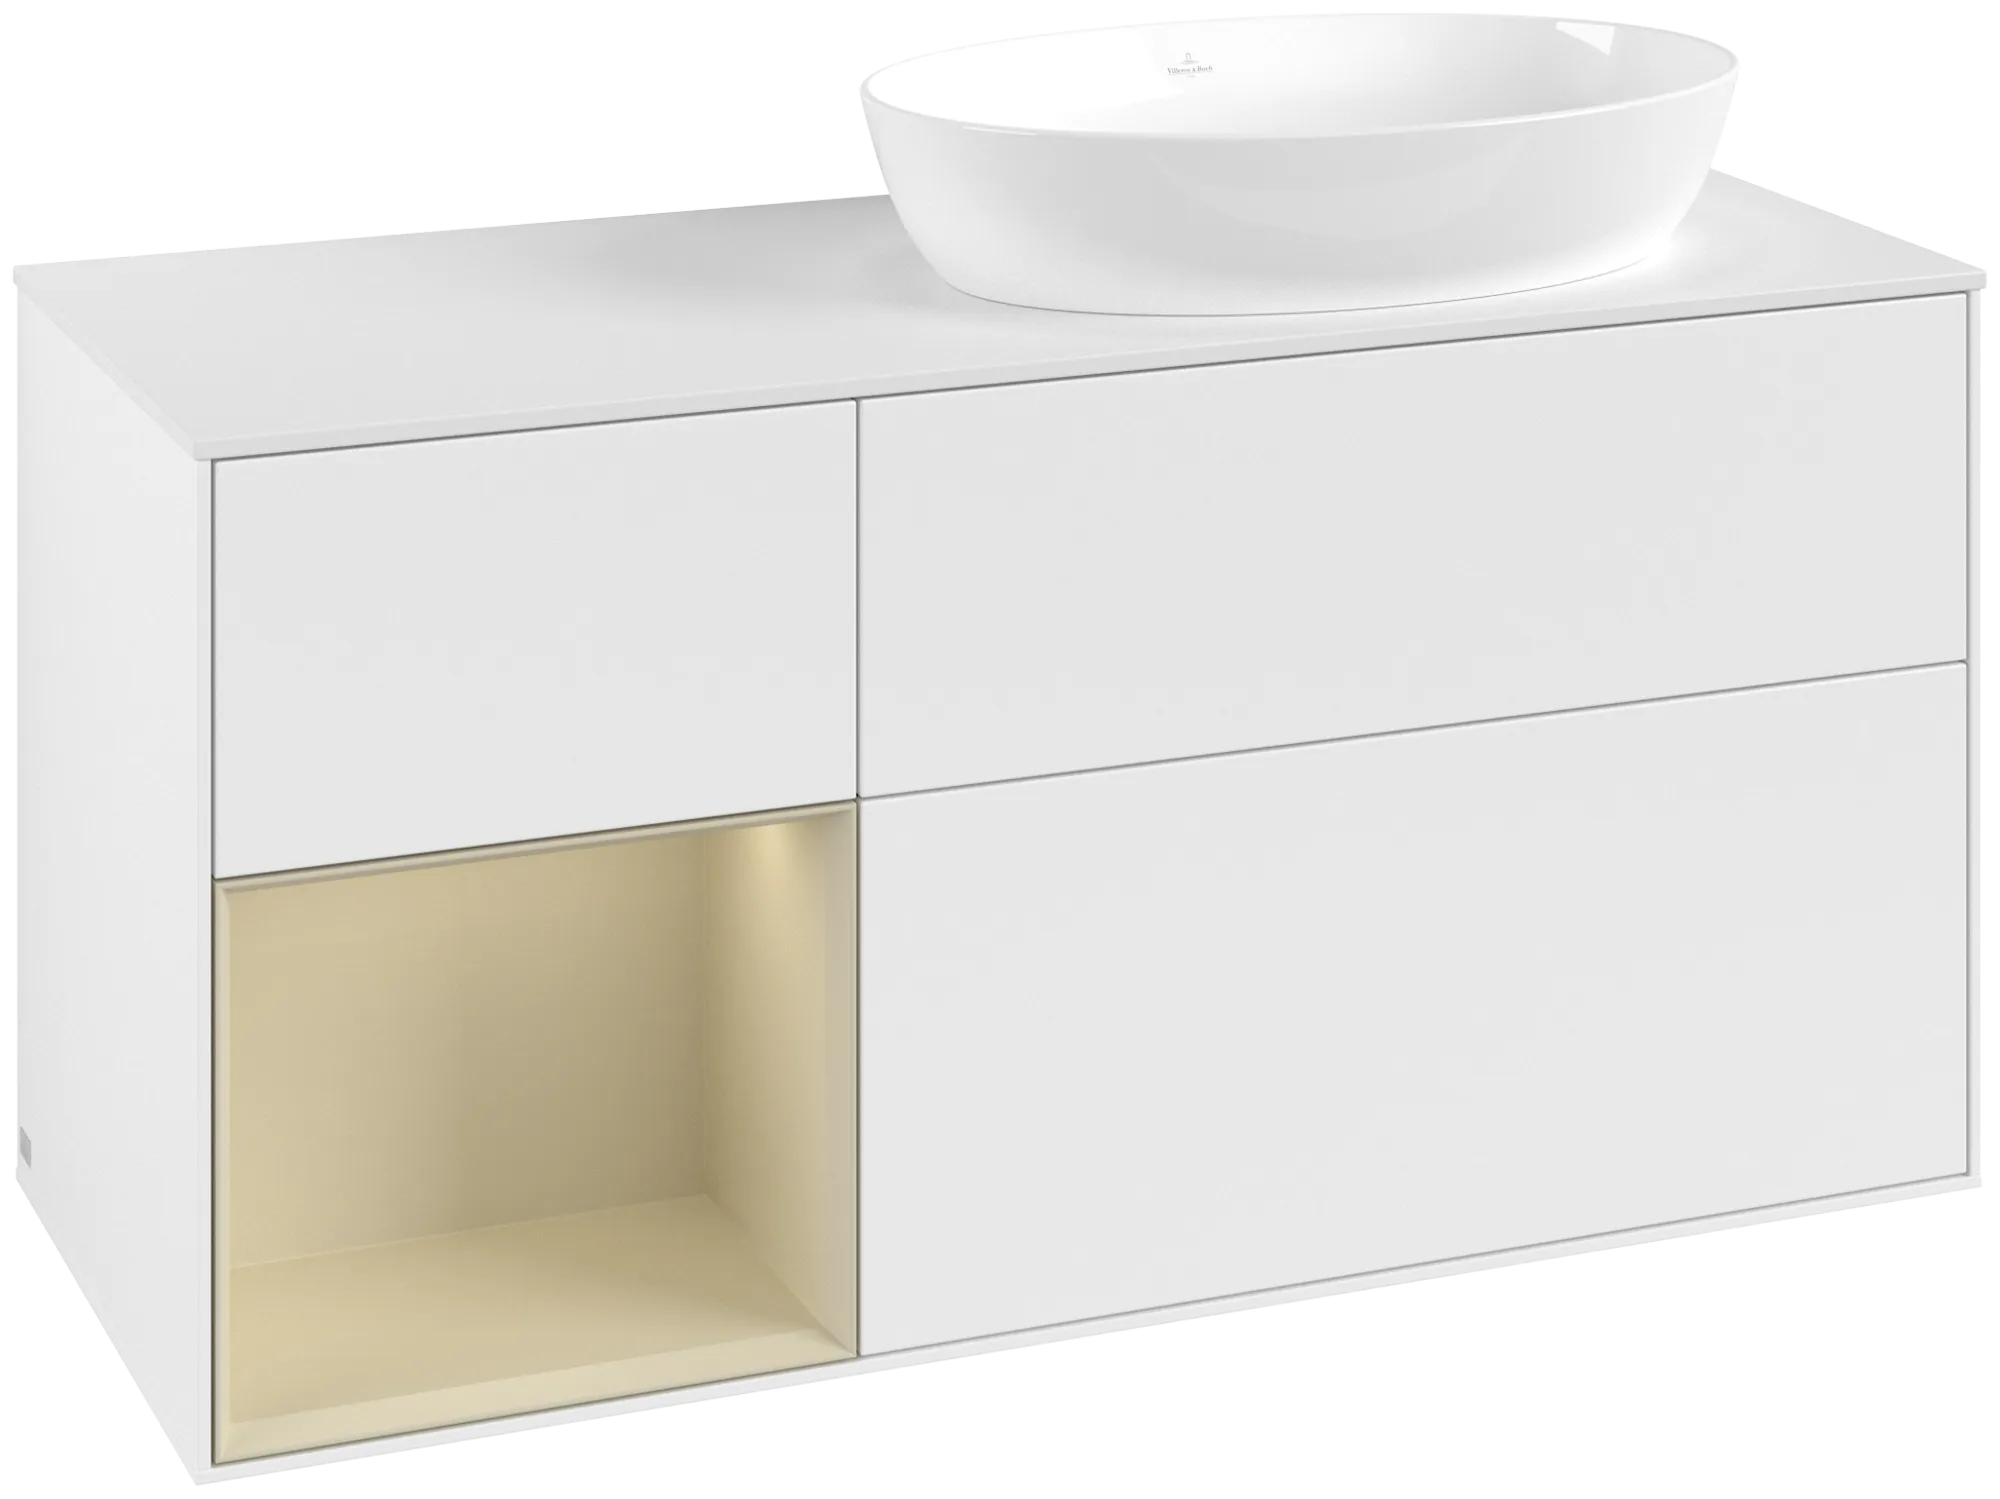 Picture of VILLEROY BOCH Finion Vanity unit, with lighting, 3 pull-out compartments, 1200 x 603 x 501 mm, White Matt Lacquer / Silk Grey Matt Lacquer / Glass White Matt #GA41HJMT